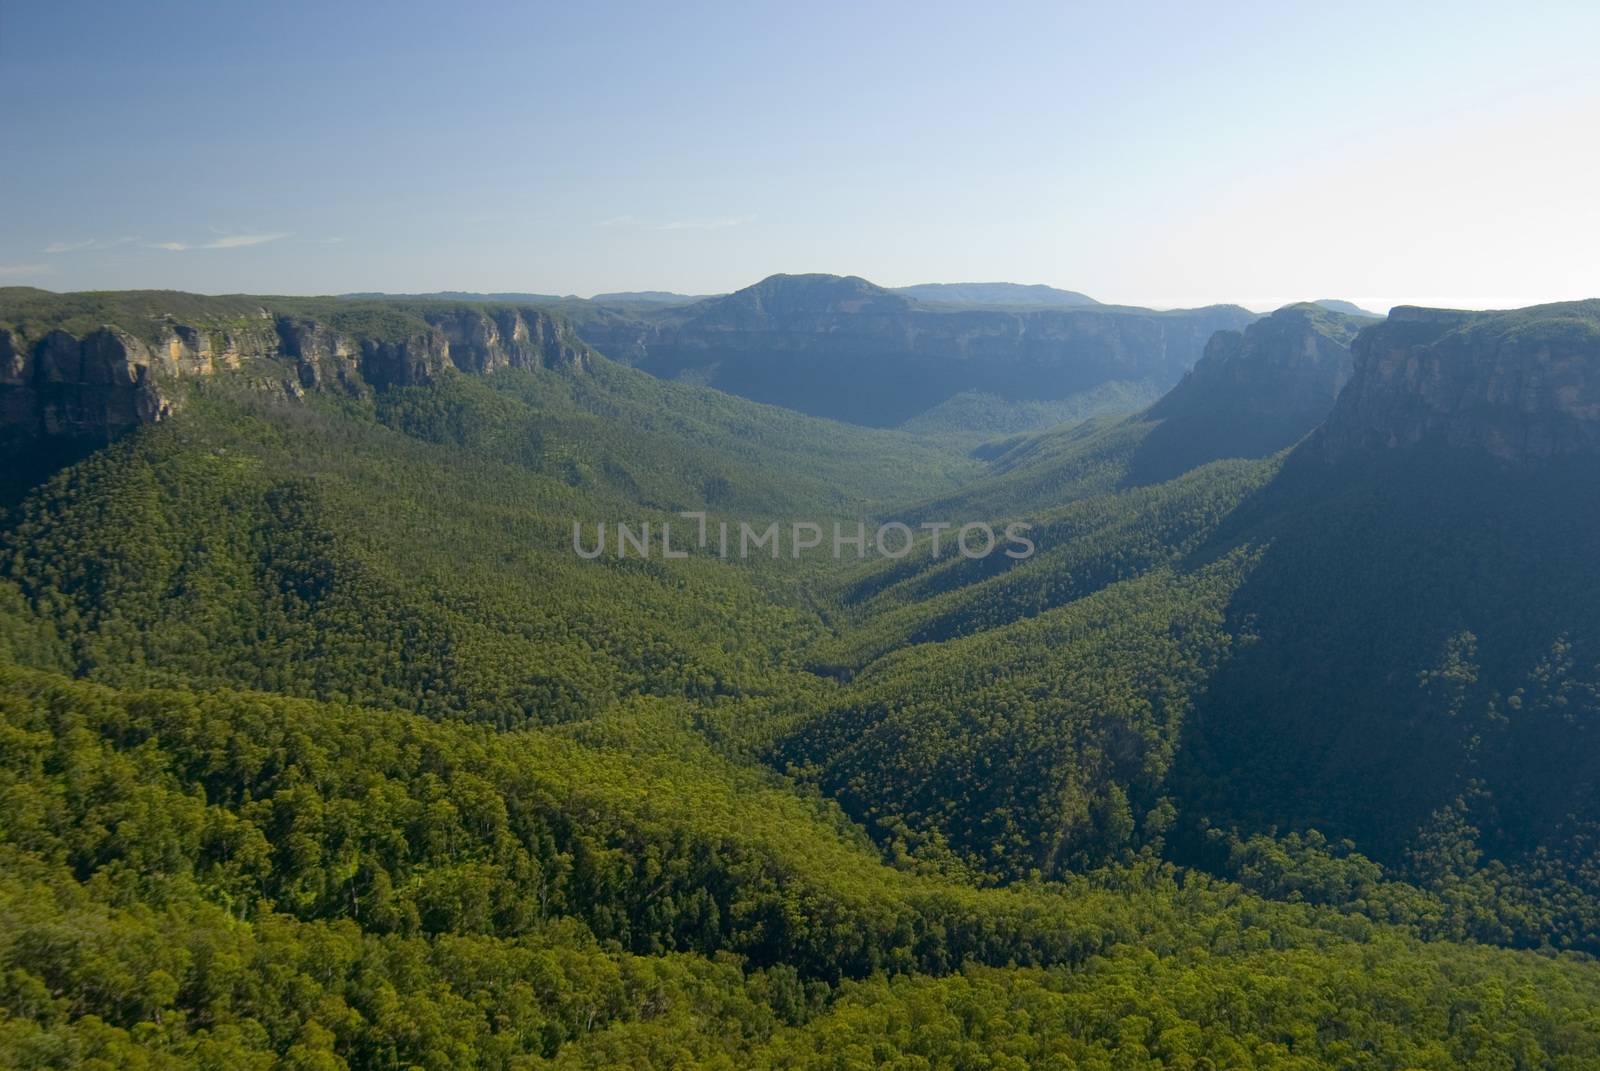 Picturesque view of the Blue Mountains, New South Wales, Australia, with a forested valley between high mountain peaks